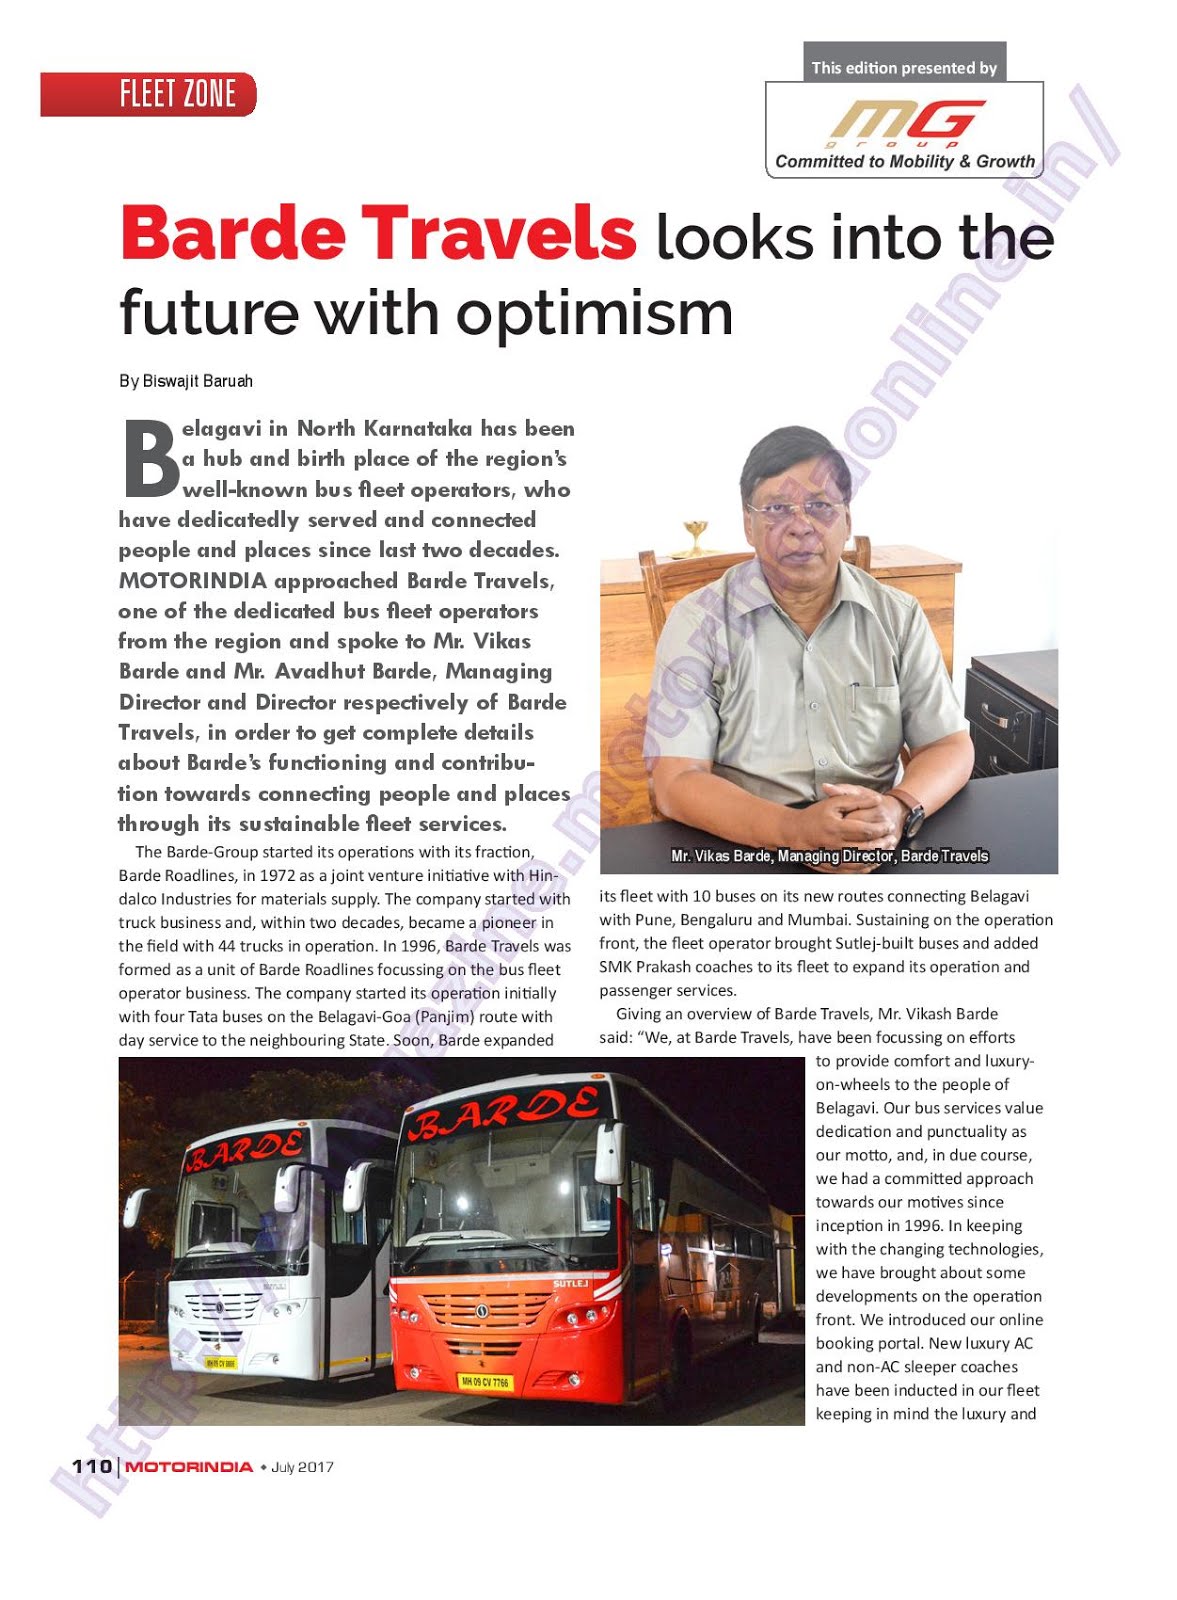 MOTOR INDIA ARTICLE 15 : BARDE TRAVELS